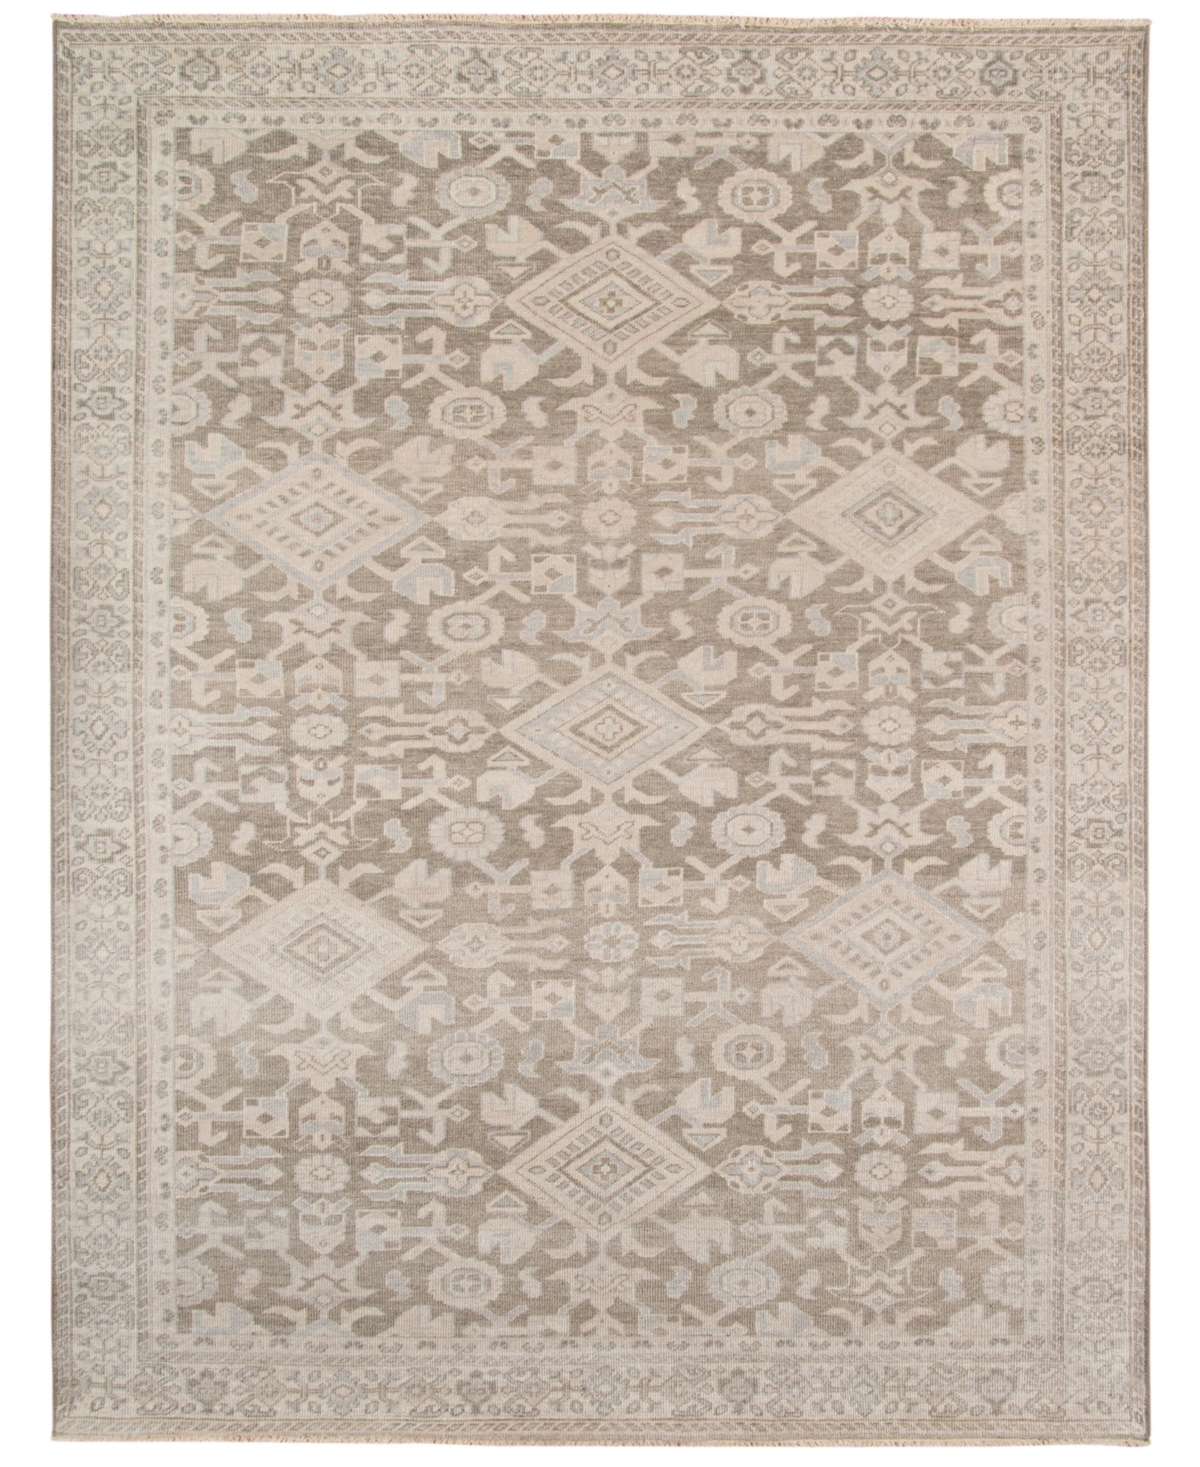 Amer Rugs Ainsley Mesilla Area Rug, 9' X 12' In Taupe